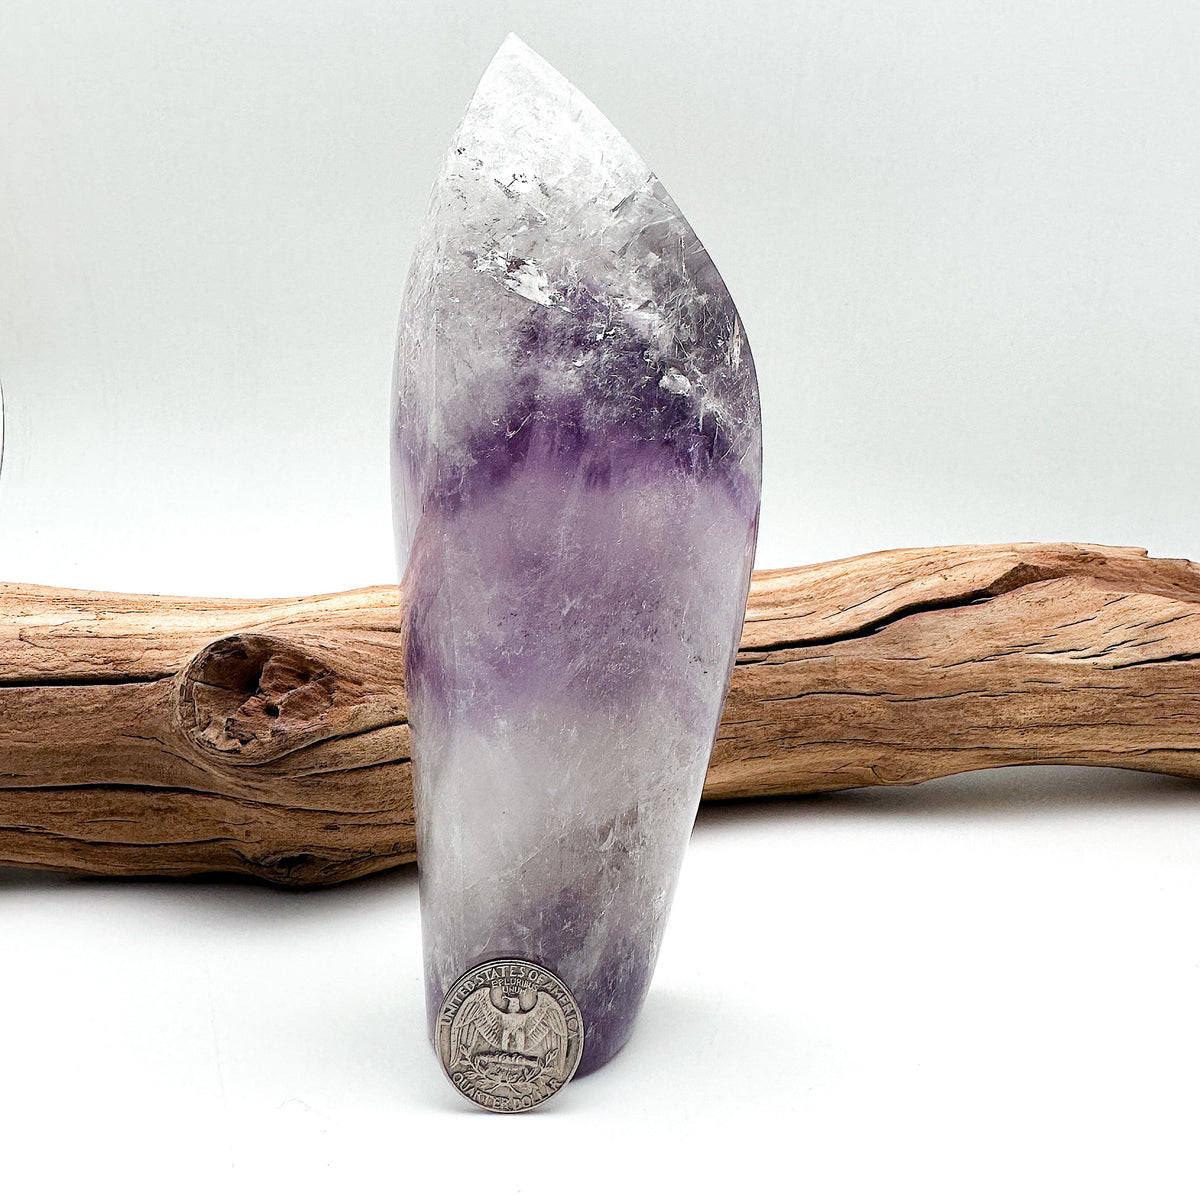 Full view comparison shot of a large Amethyst crystal and a US quarter coin